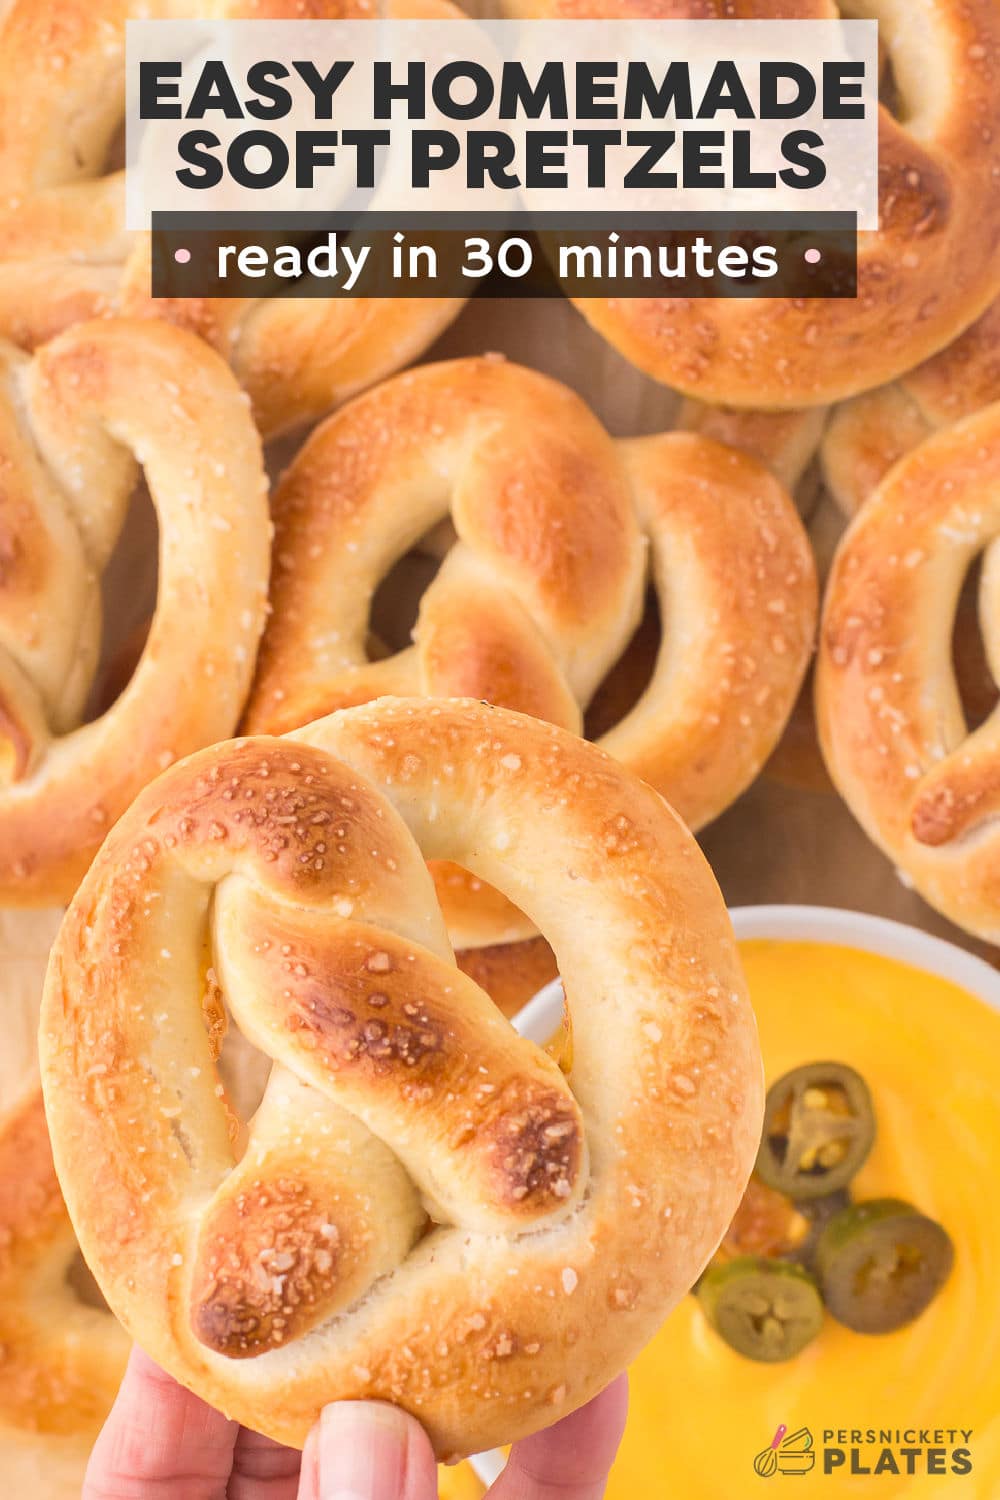 This easy homemade soft pretzel recipe yields a soft chewy texture with a golden brown crust. It's a foolproof recipe that requires no baking soda solution, no resting the dough, and no fancy mixers to get the signature pretzel flavor we all crave! This satisfying snack is made with a simple dough baked with a sprinkle of sea salt. They're even better with a side of your favorite dipping sauce!  | www.persnicketyplates.com